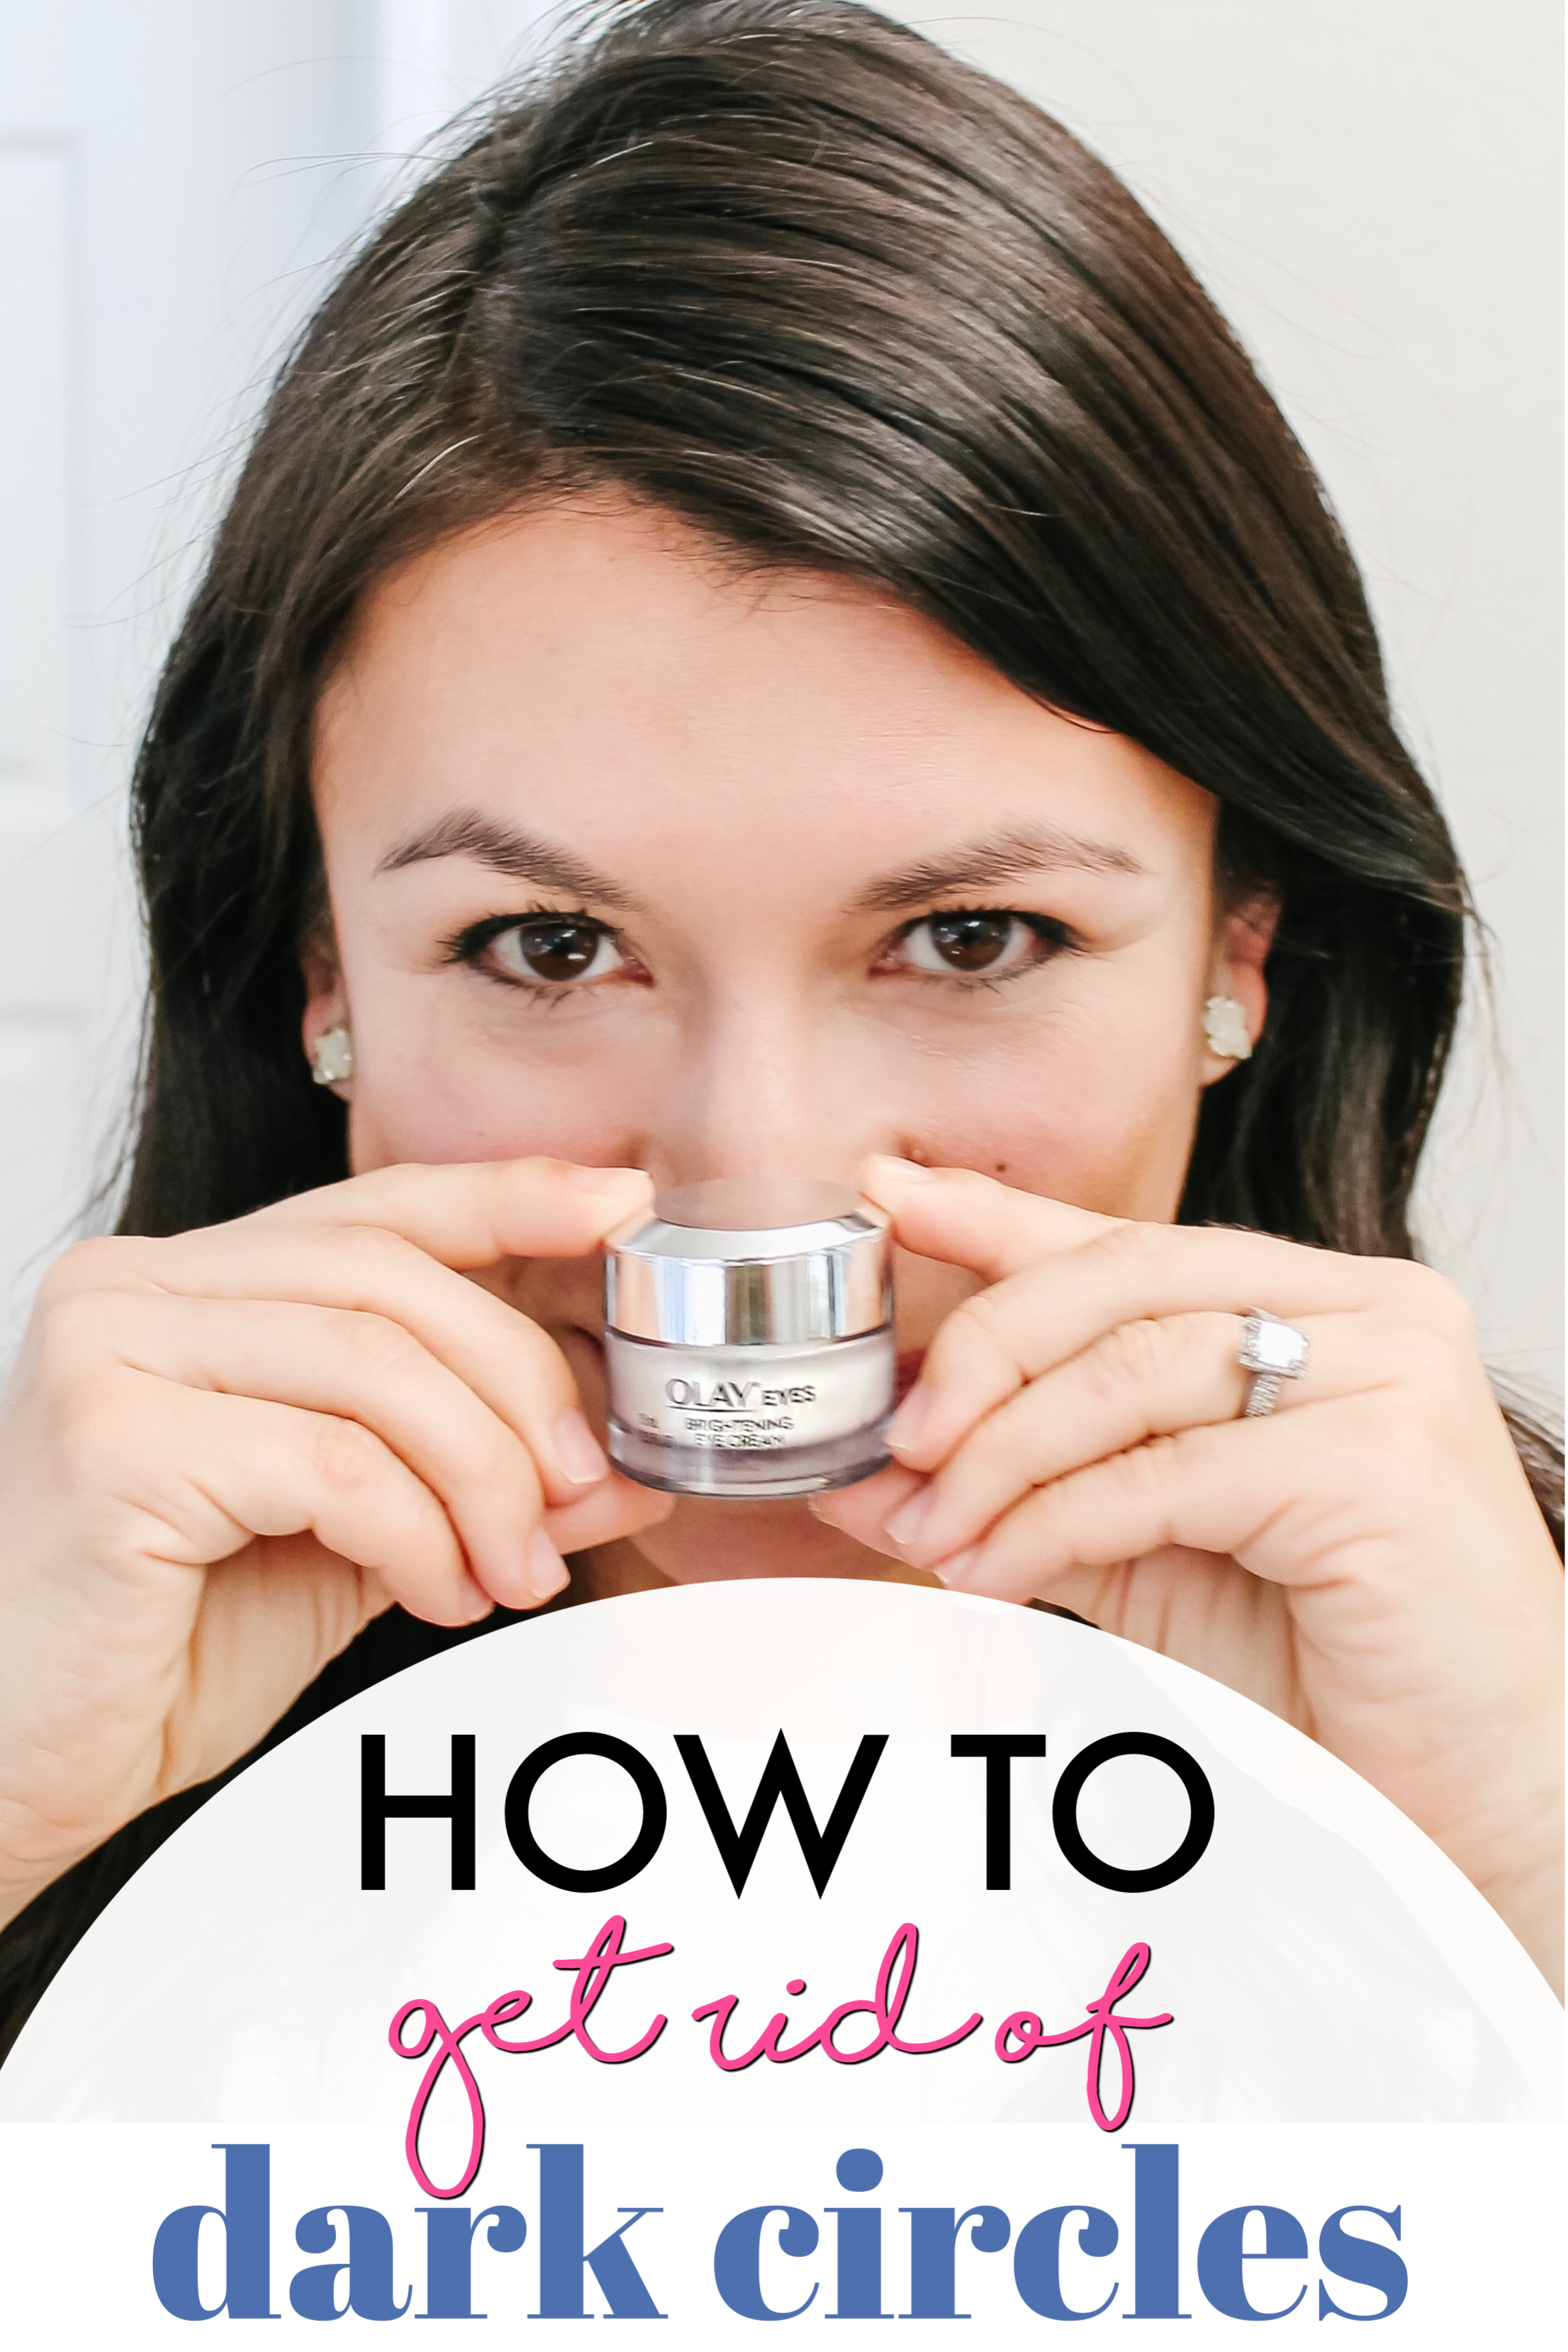 How to get rid of your dark circles with the new @OlayUS Eyes Brightening Eye Cream! The best eye cream for dark circles. #ad #heybrighteyes #olay #CVSBeauty @CVS_Beauty